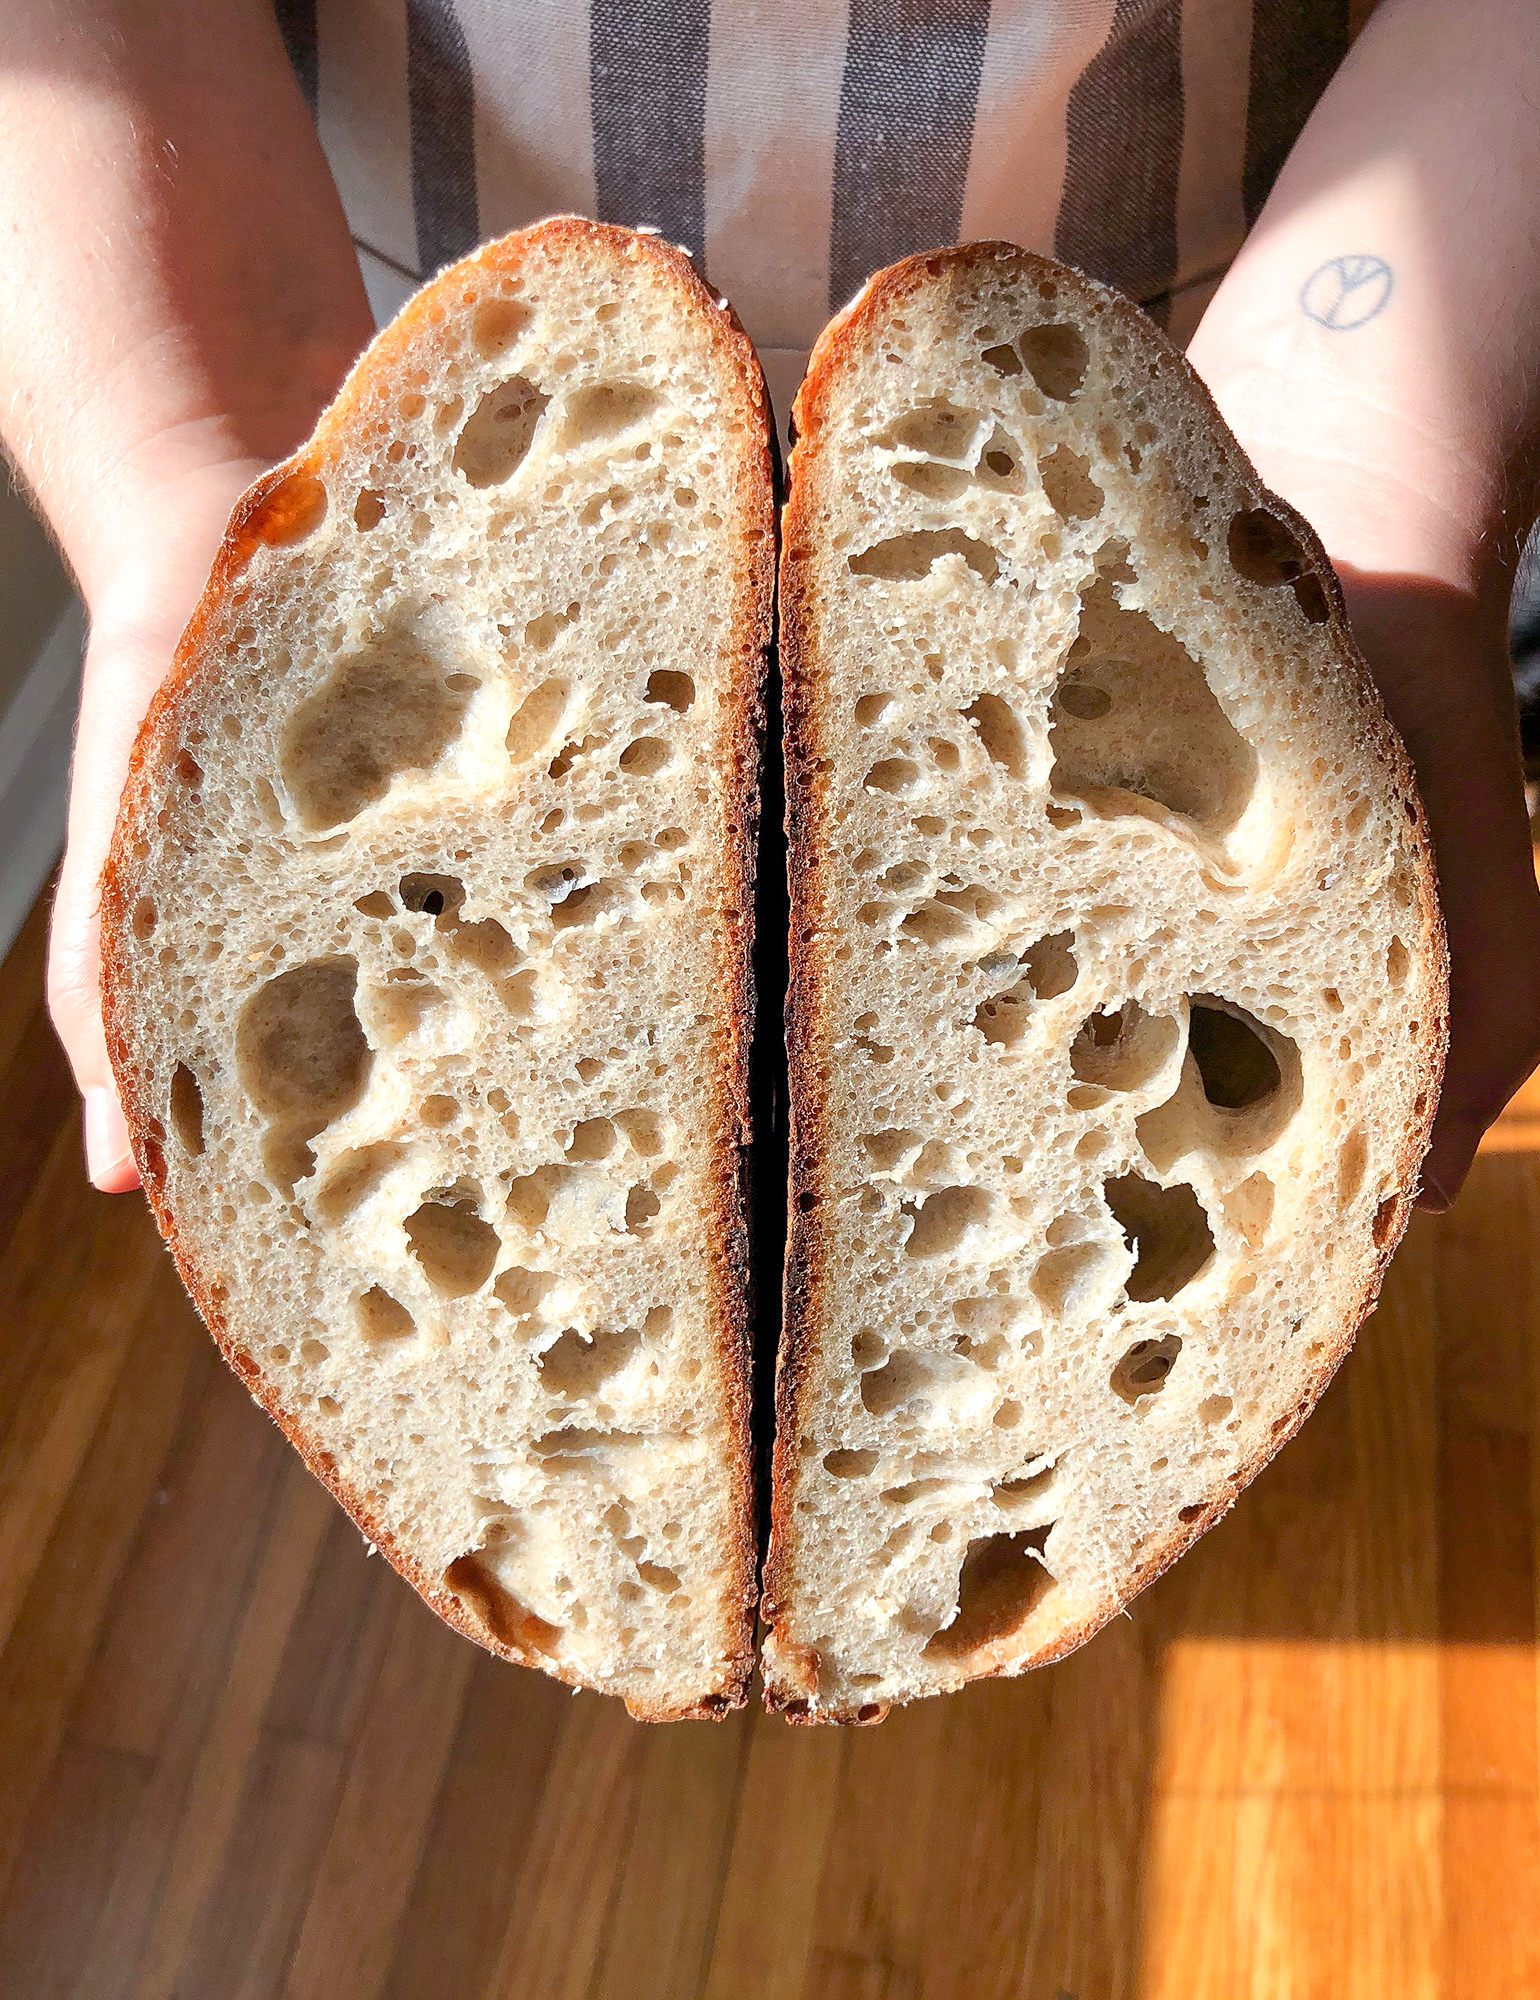 On Baking Homemade Bread + Helpful Bread Baking Resources - I